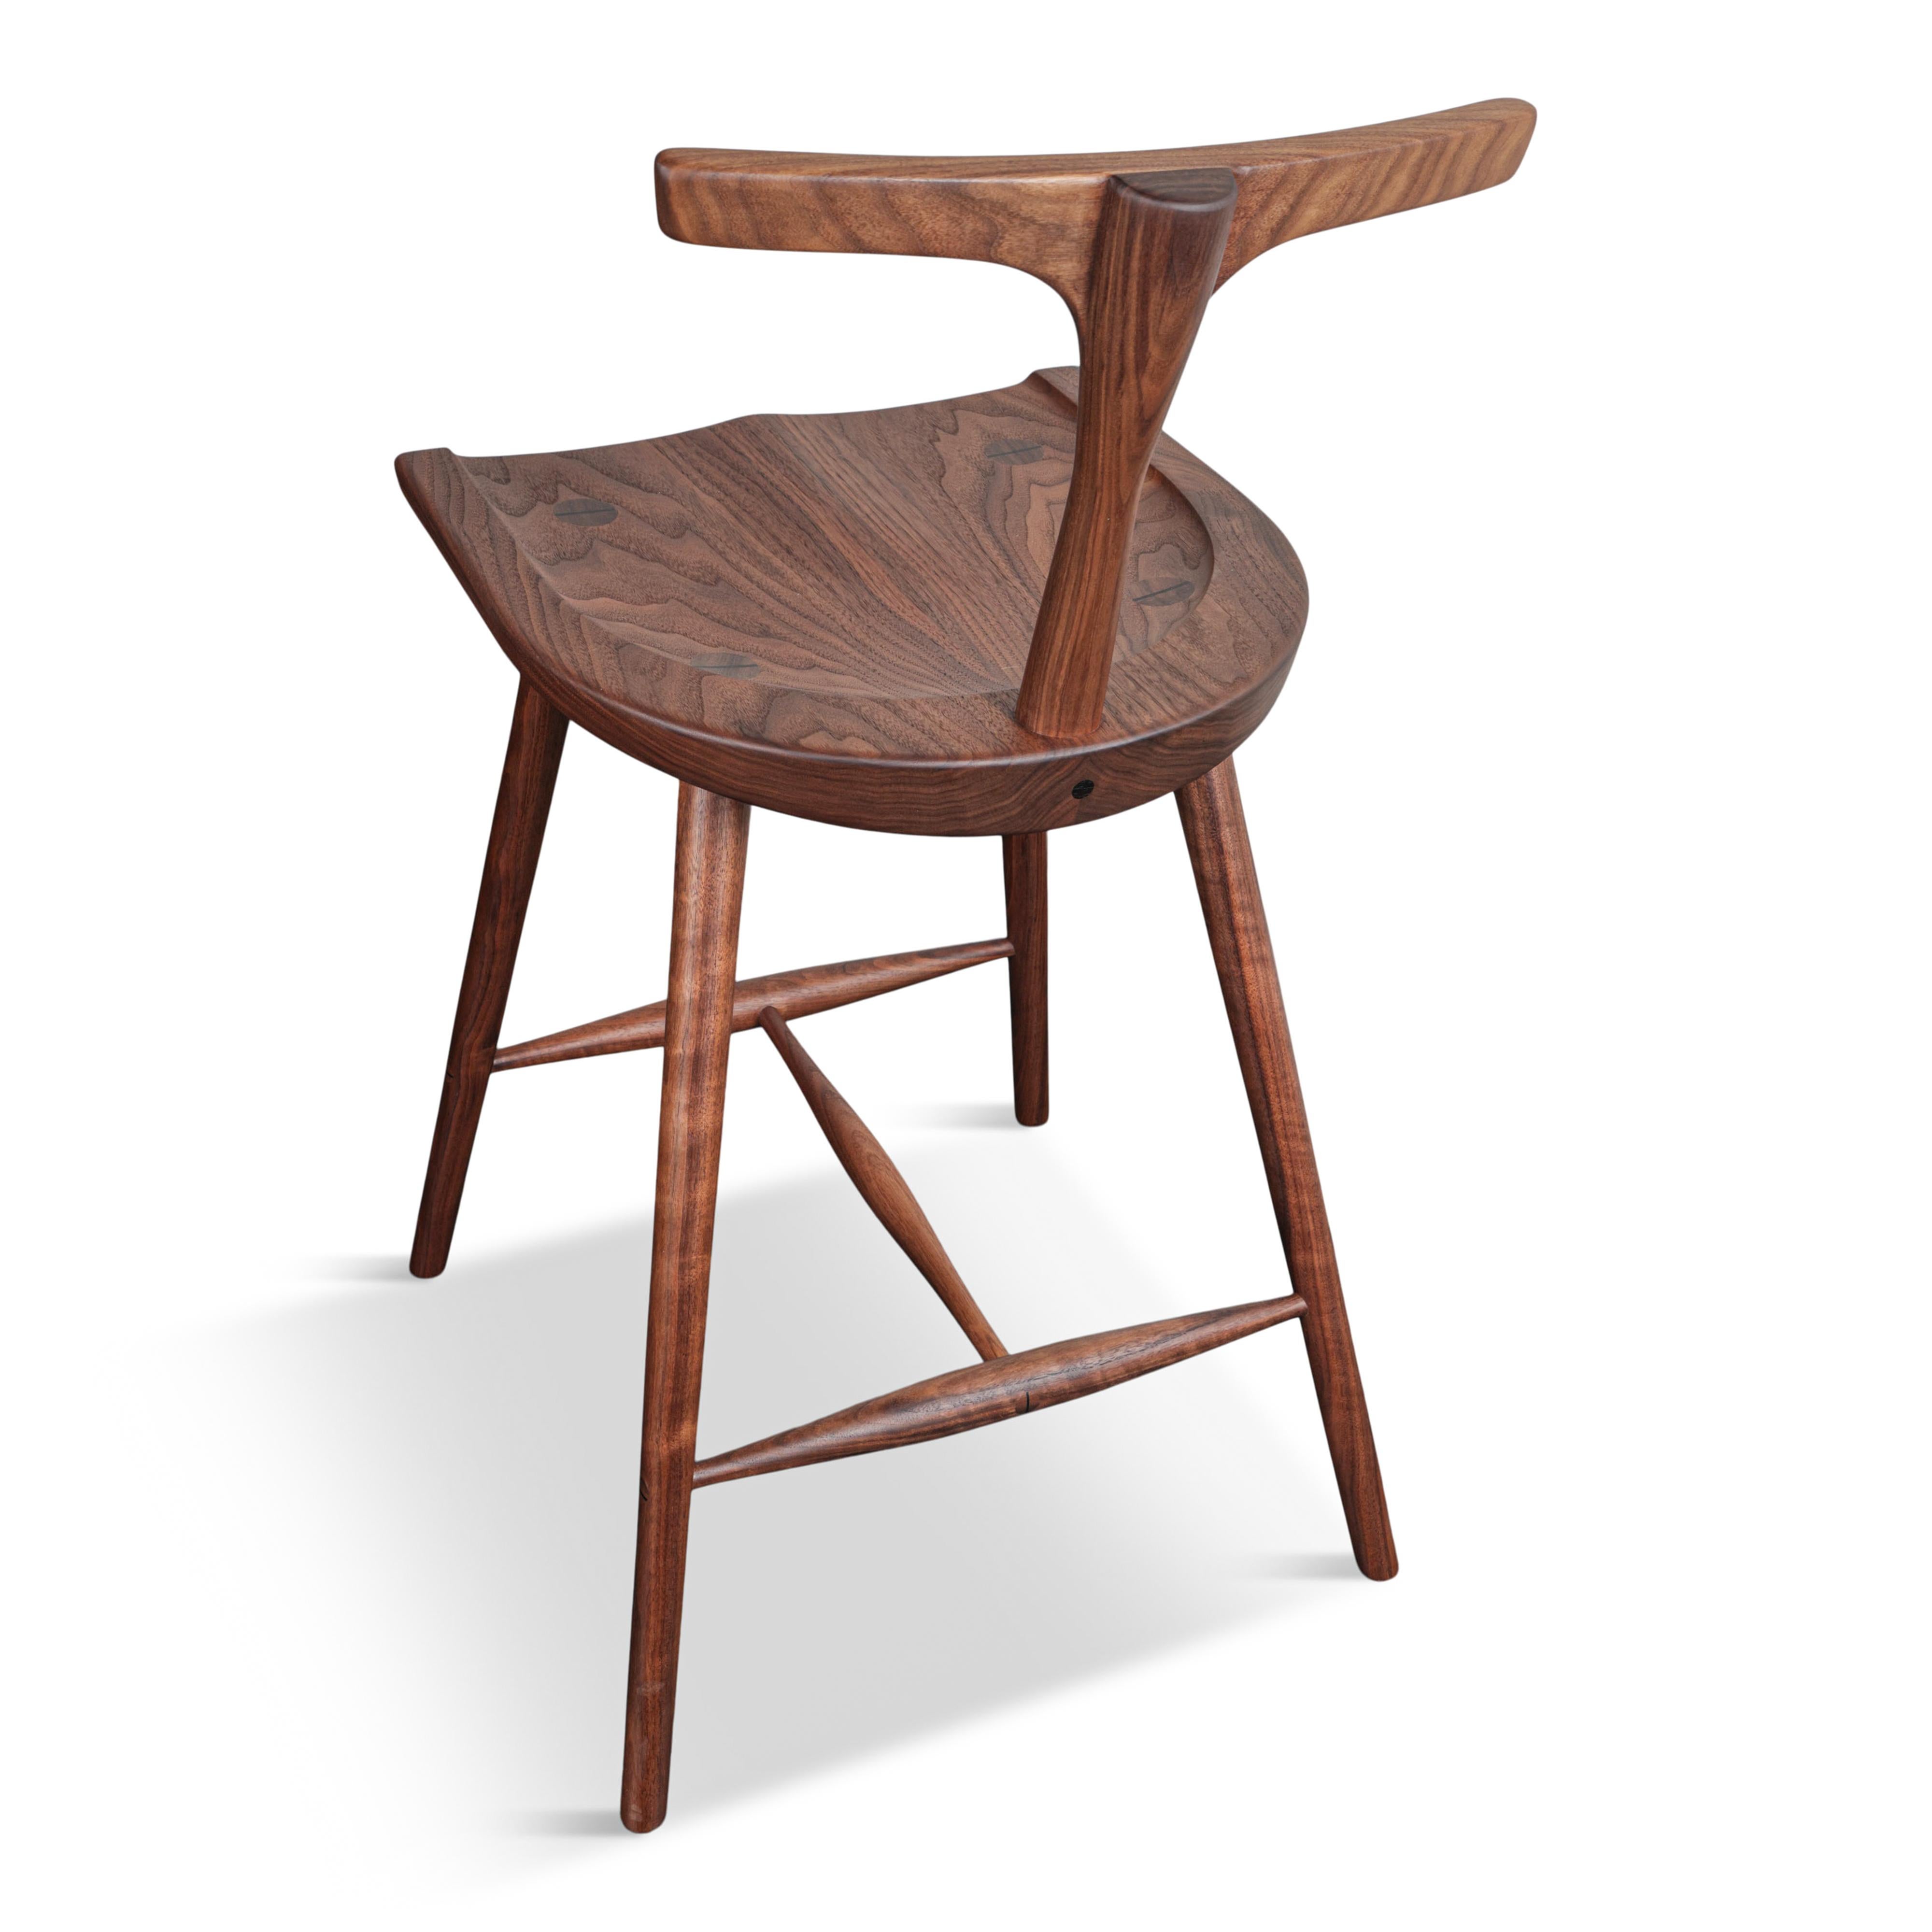 Comfortable, elegant and classic, a design that will beautifully suit any home interior. Handcrafted from solid American Black Walnut, made in Canada. The Krane stool features a generously sized, ergonomically sculpted seat with a perfectly sculpted